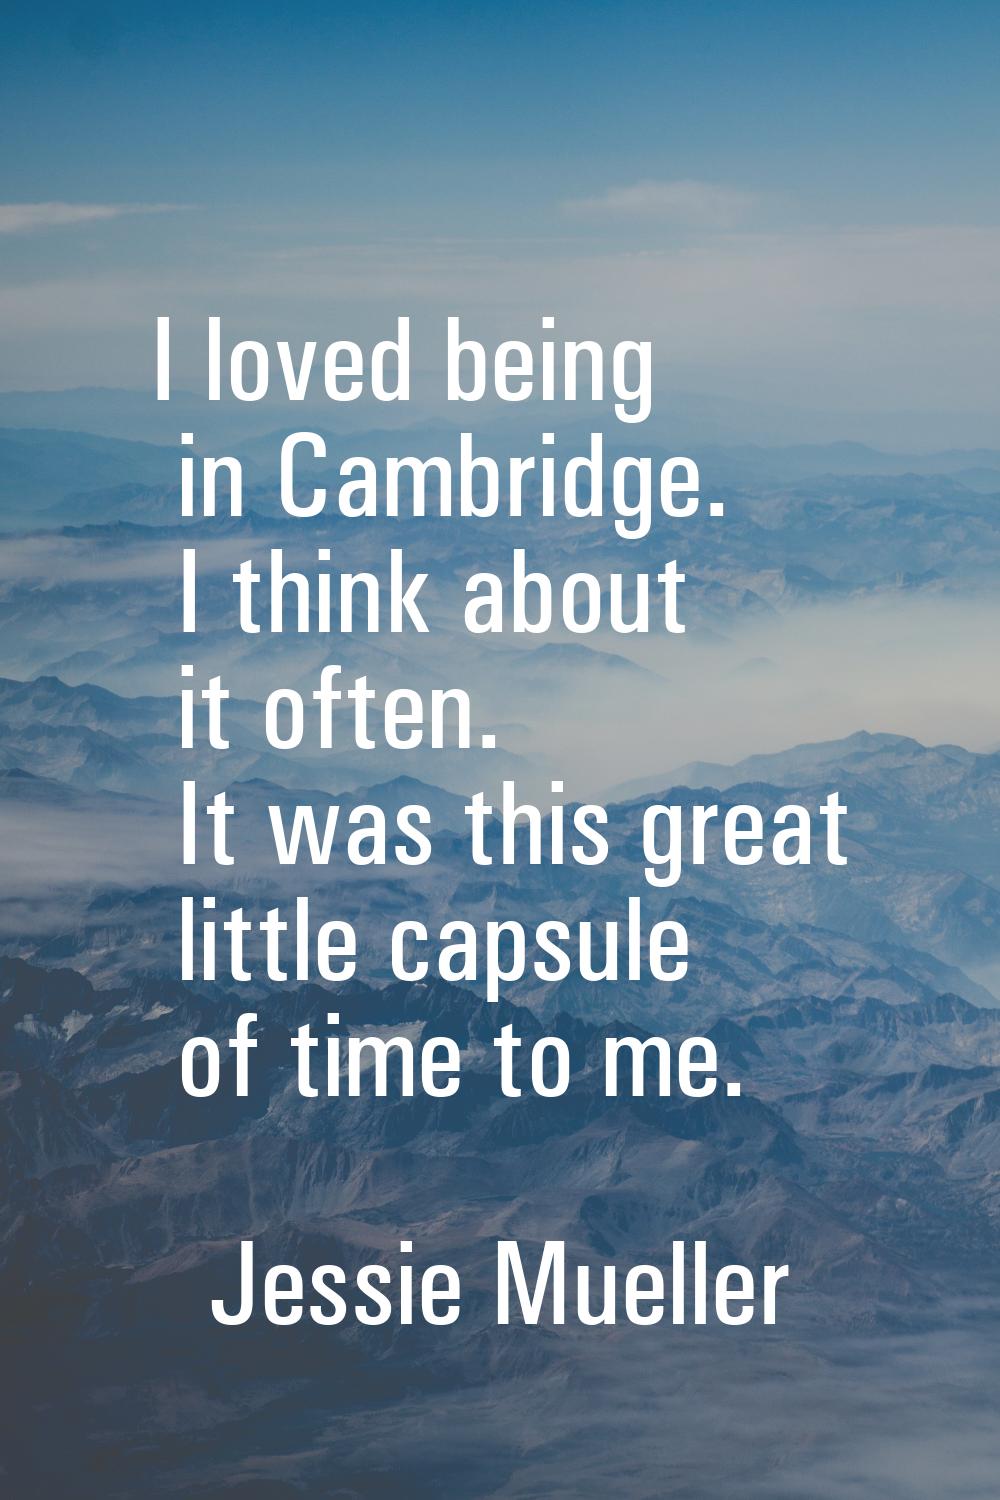 I loved being in Cambridge. I think about it often. It was this great little capsule of time to me.